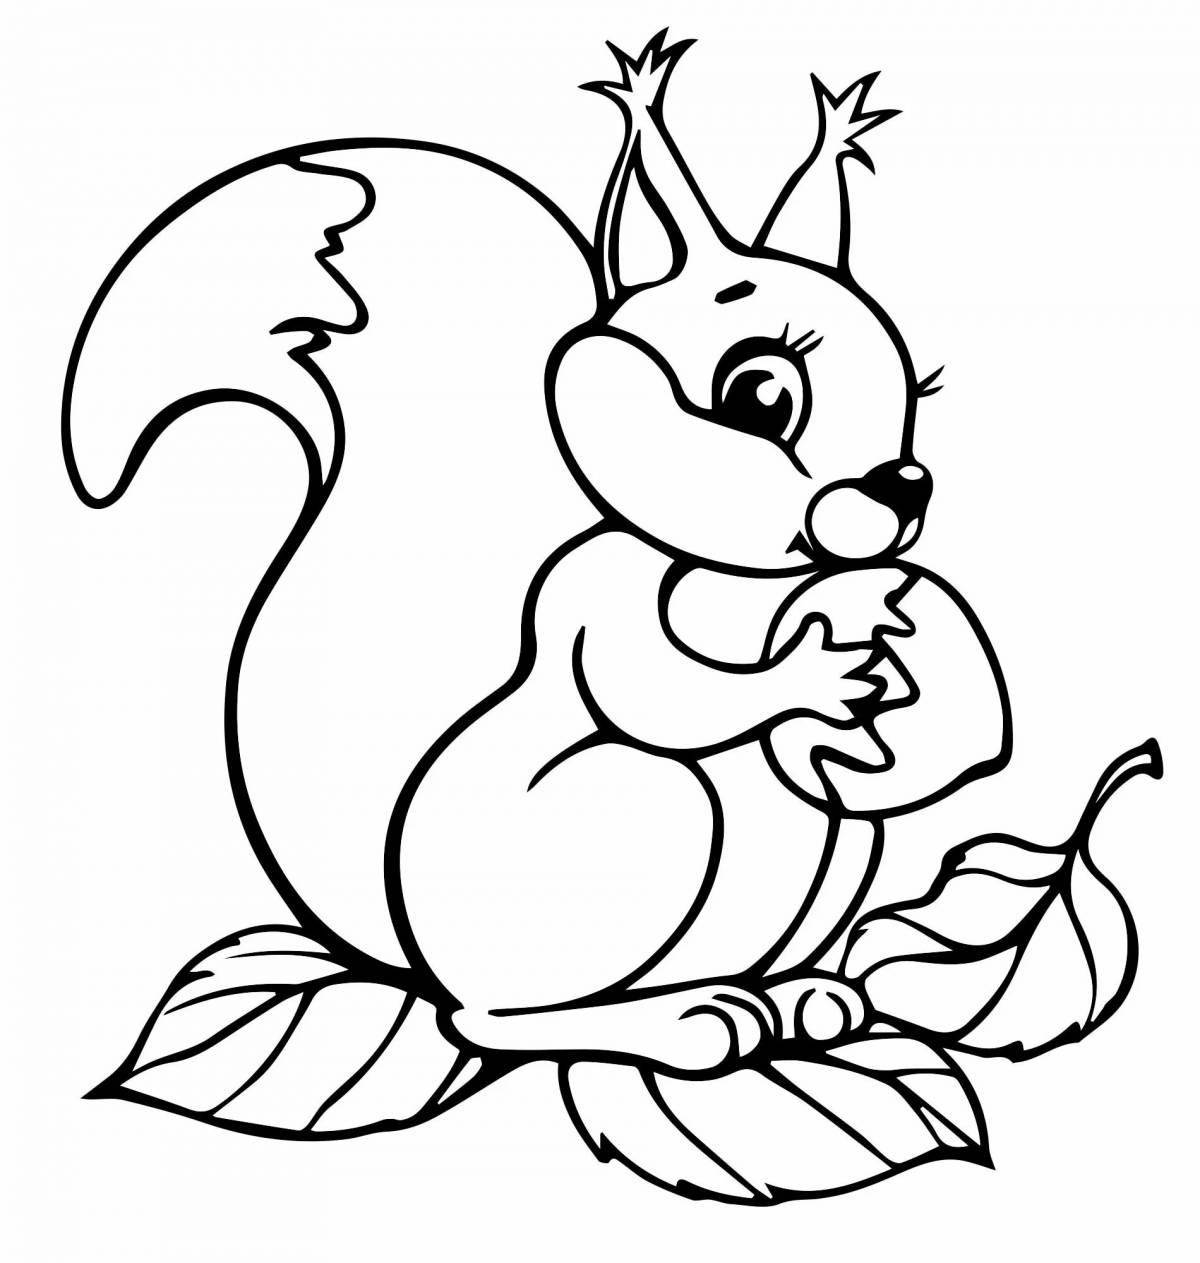 Playful coloring of a squirrel with a bump